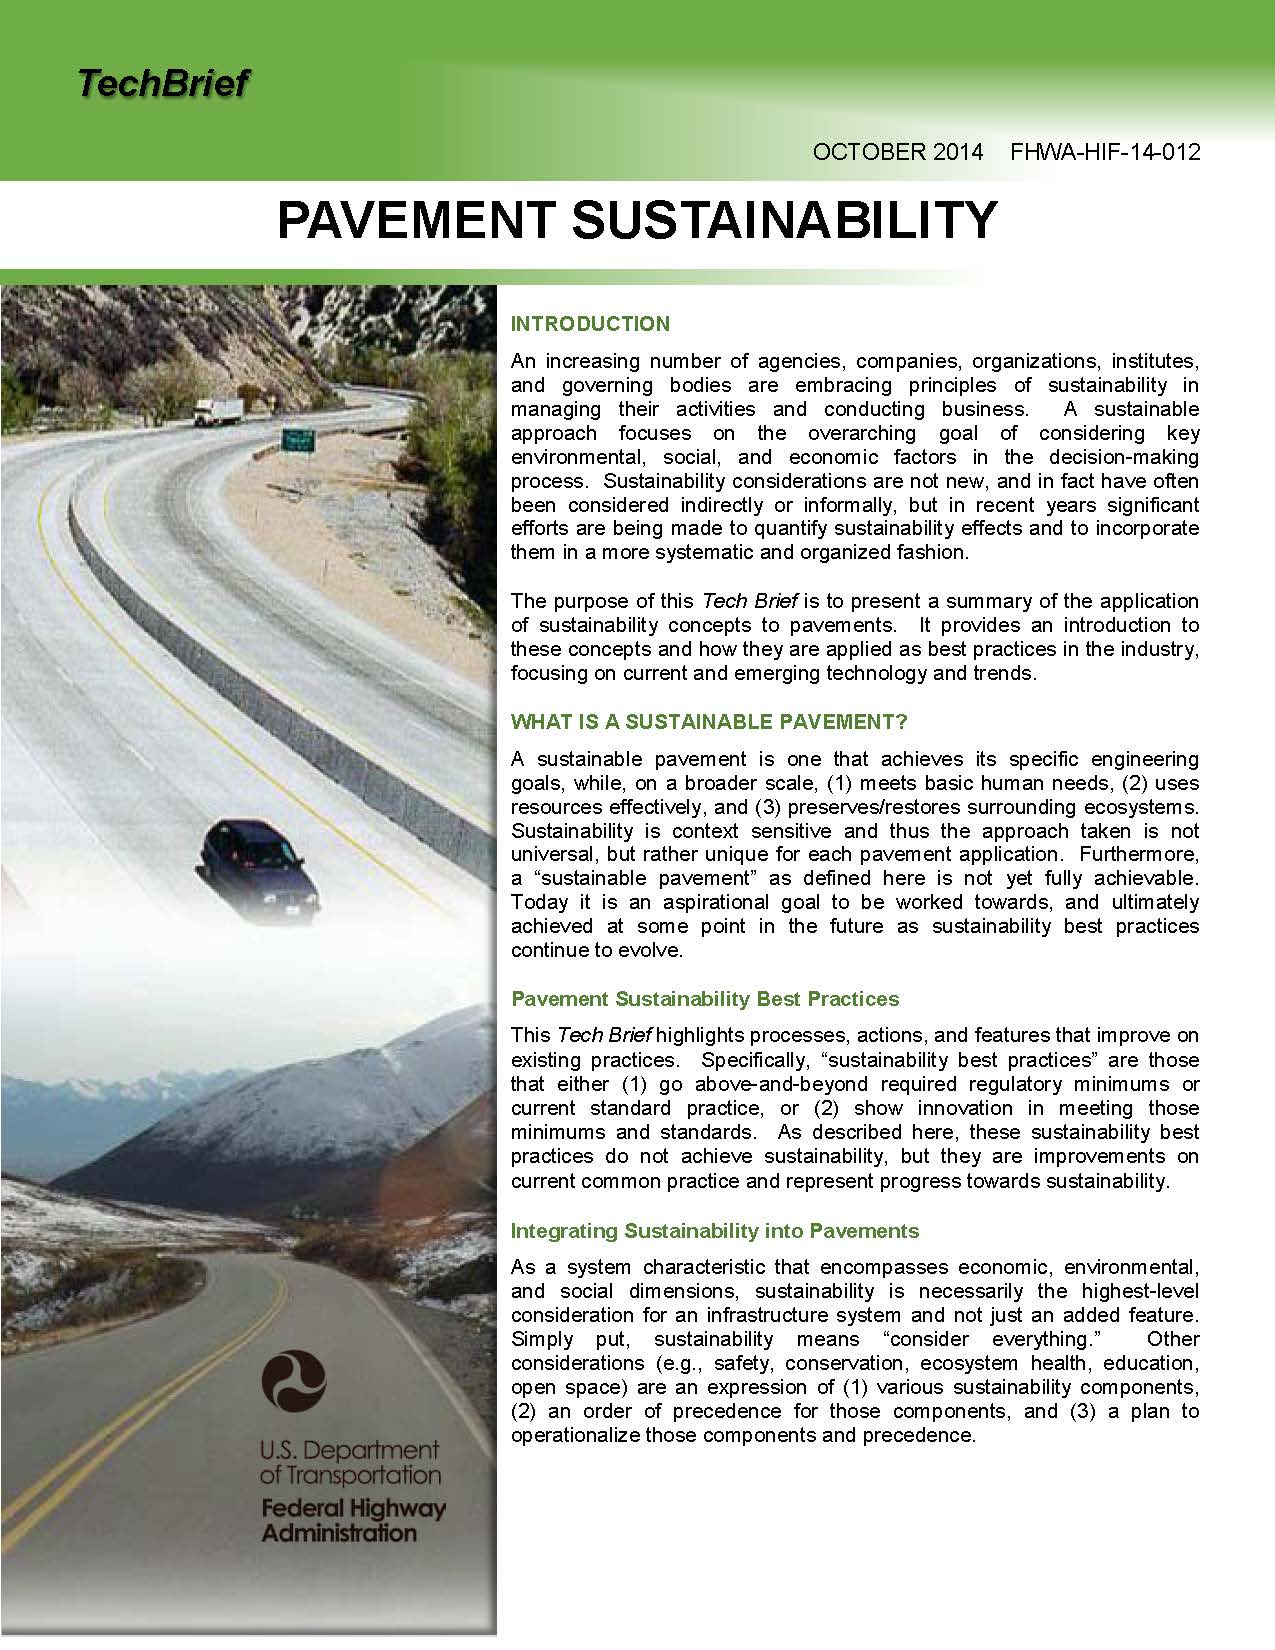 Tech Brief: Life Cycle Assessment of Pavements